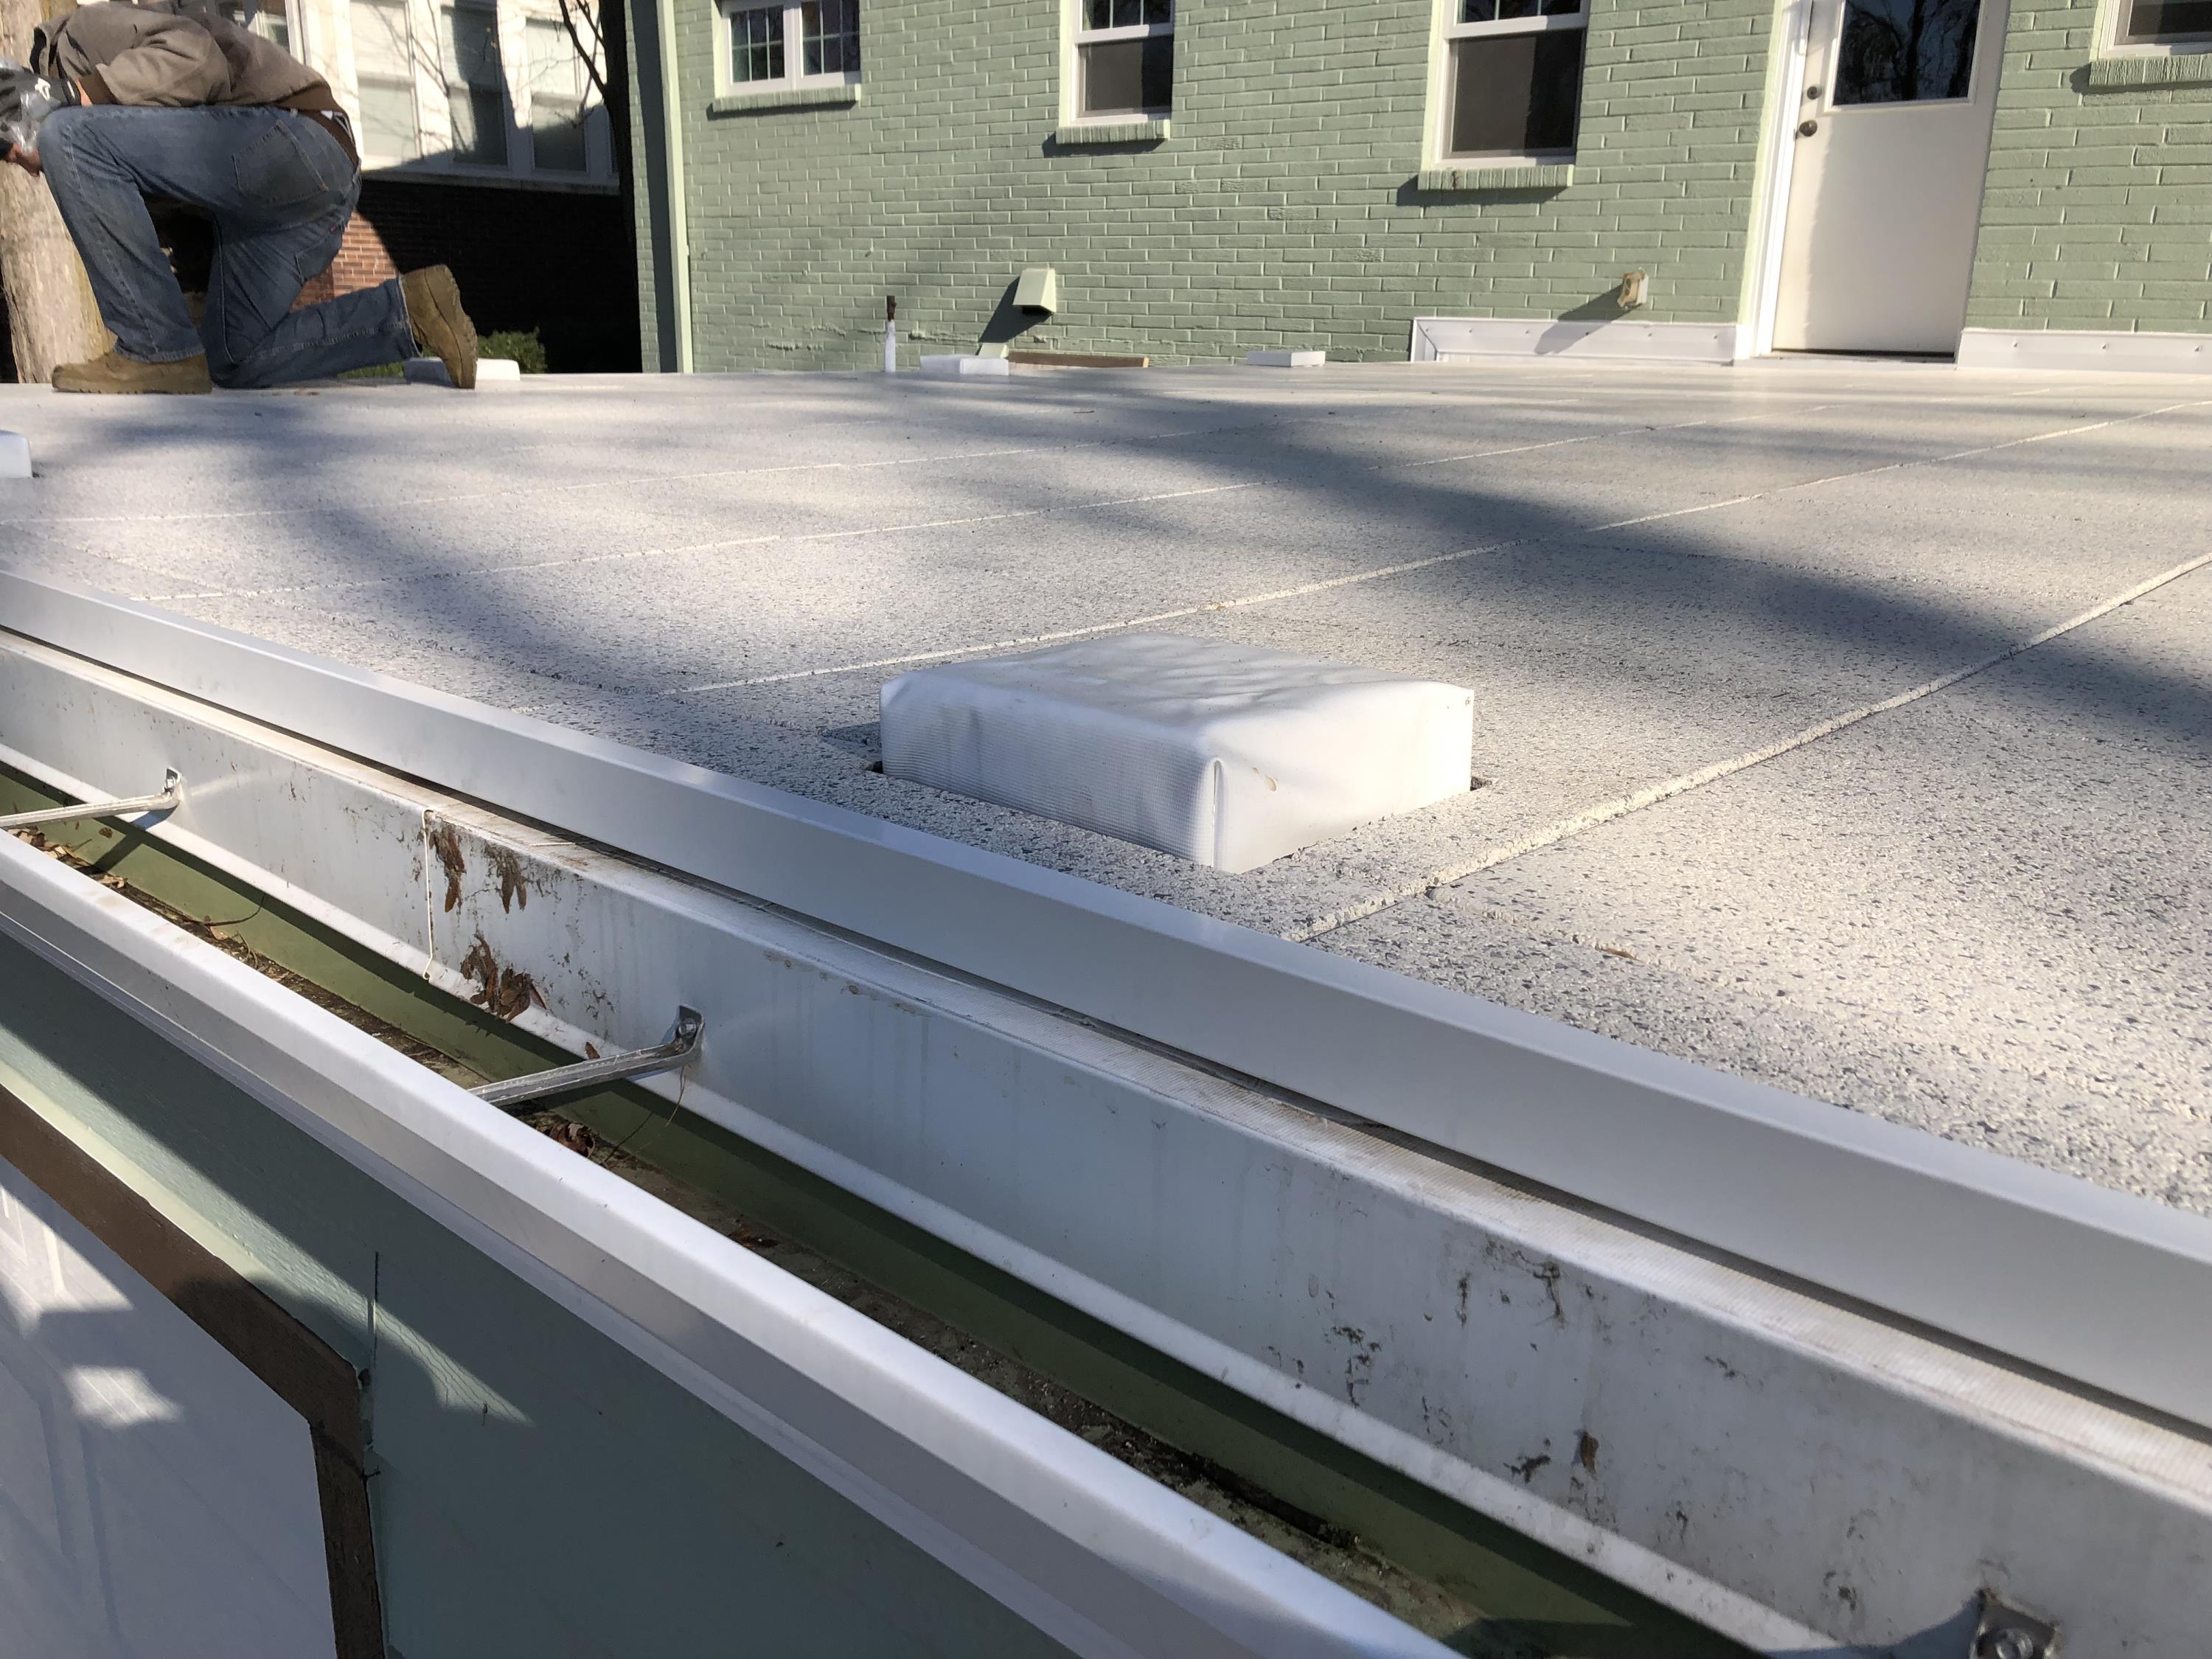 UNITY - Showing perforated metal edging on roof deck